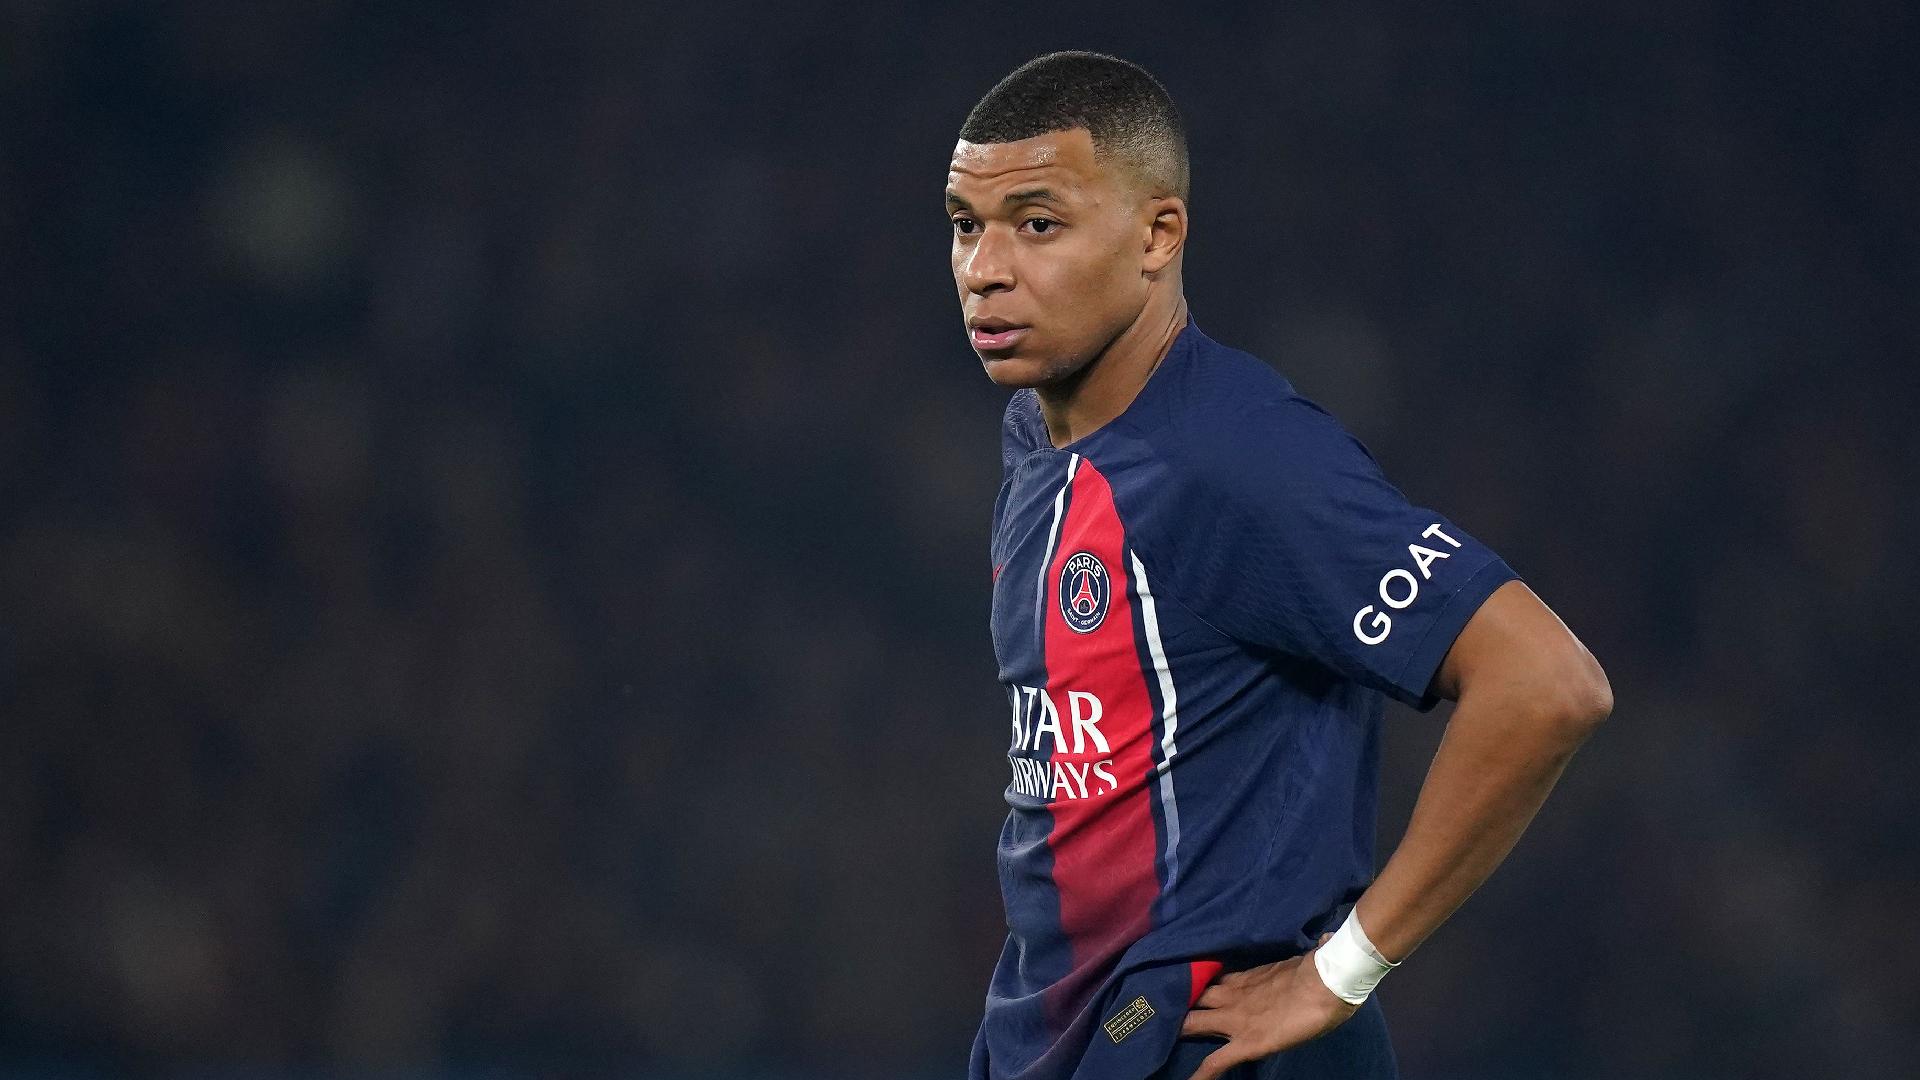 Kylian Mbappe not been paid by Paris Saint-Germain since April, formal notice served by Real Madrid man